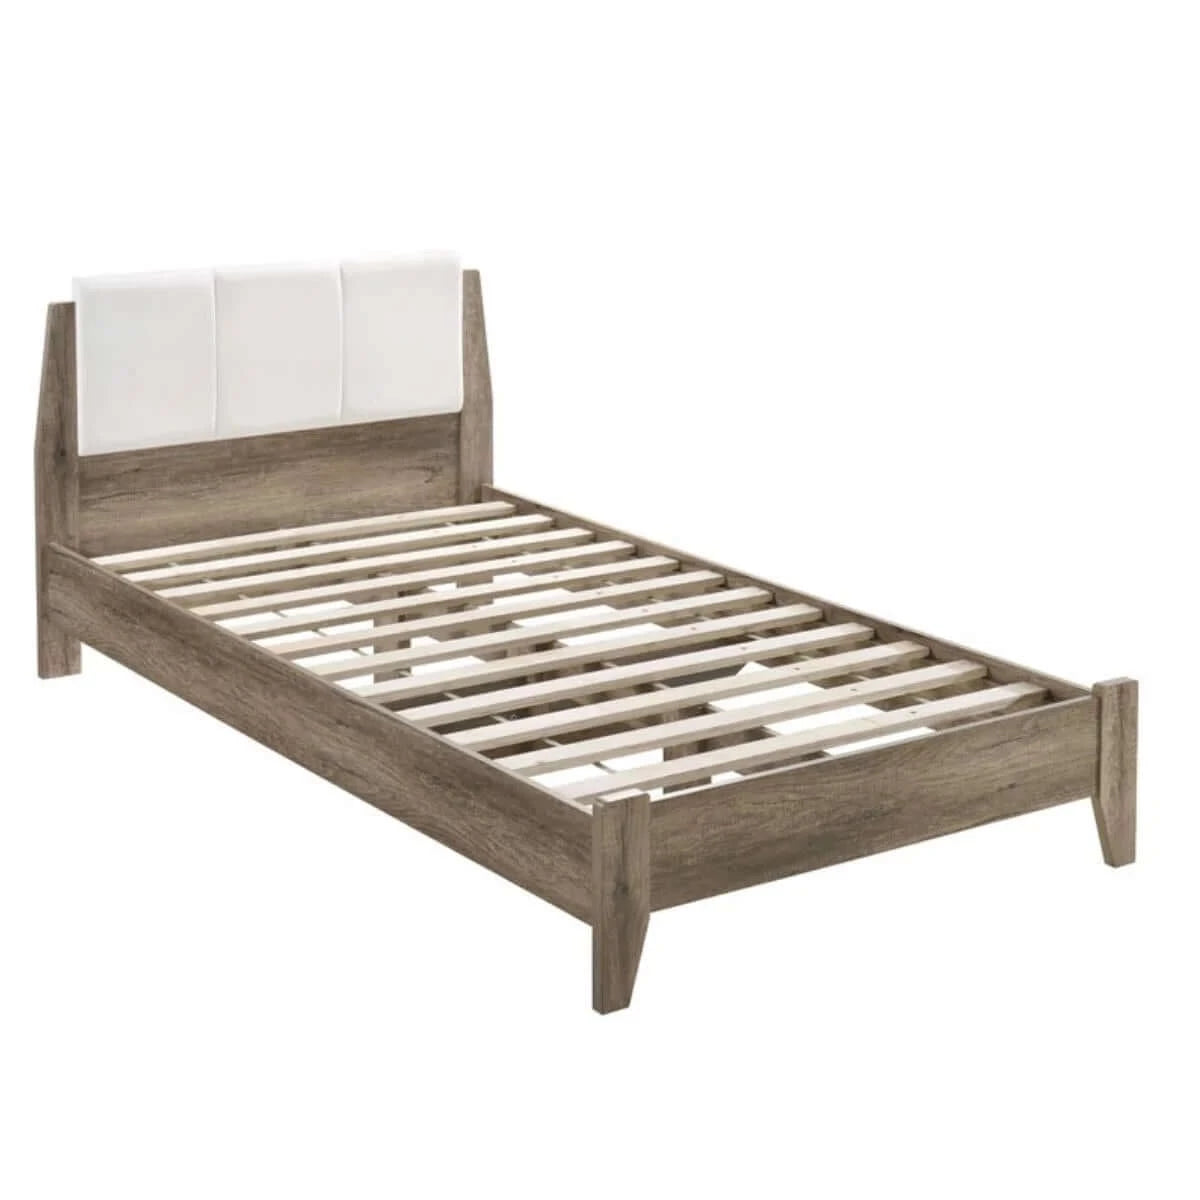 Buy wooden bed frame with leather upholstered bed head size double - upinteriors-Upinteriors